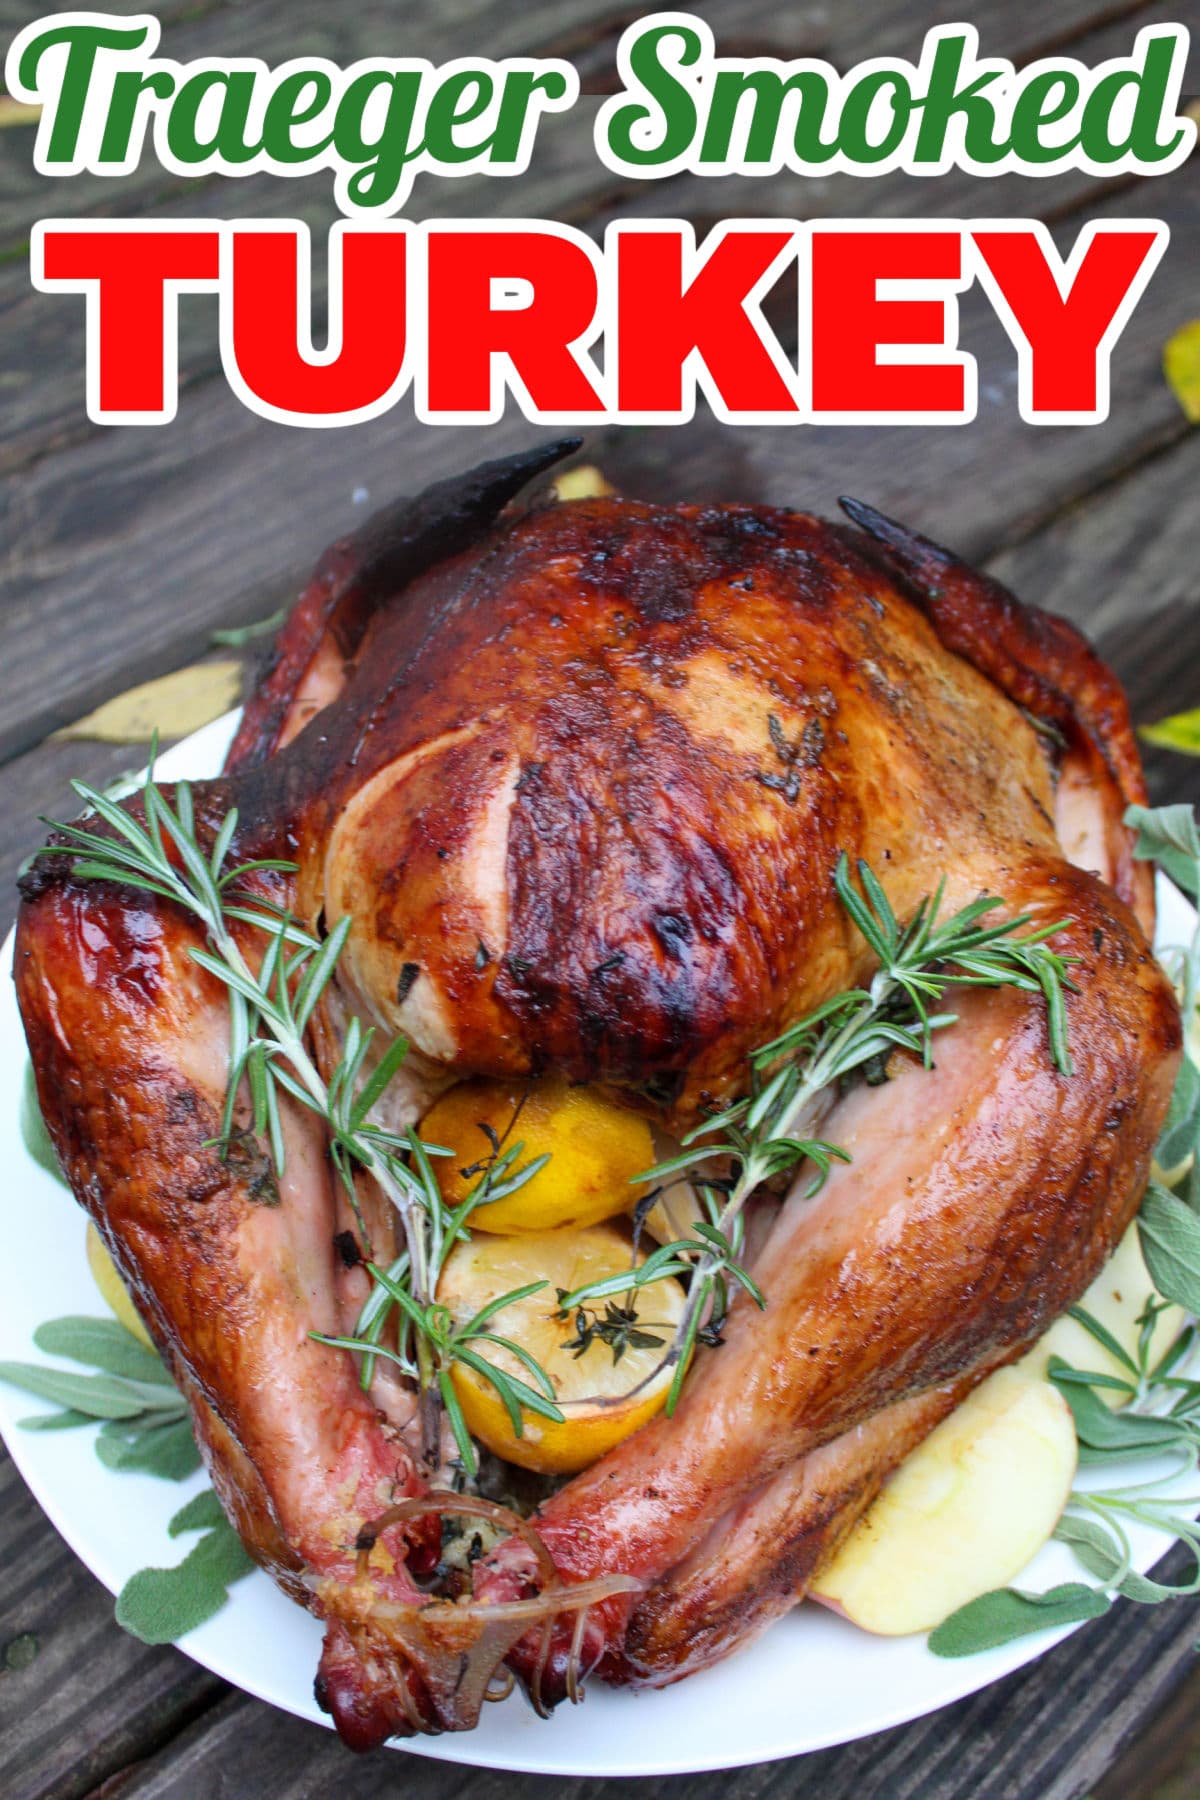 This Traeger Smoked Turkey is juicy, tender, slightly smoky and so easy to make! Your dinner will definitely make the holiday newsletter! via @foodhussy